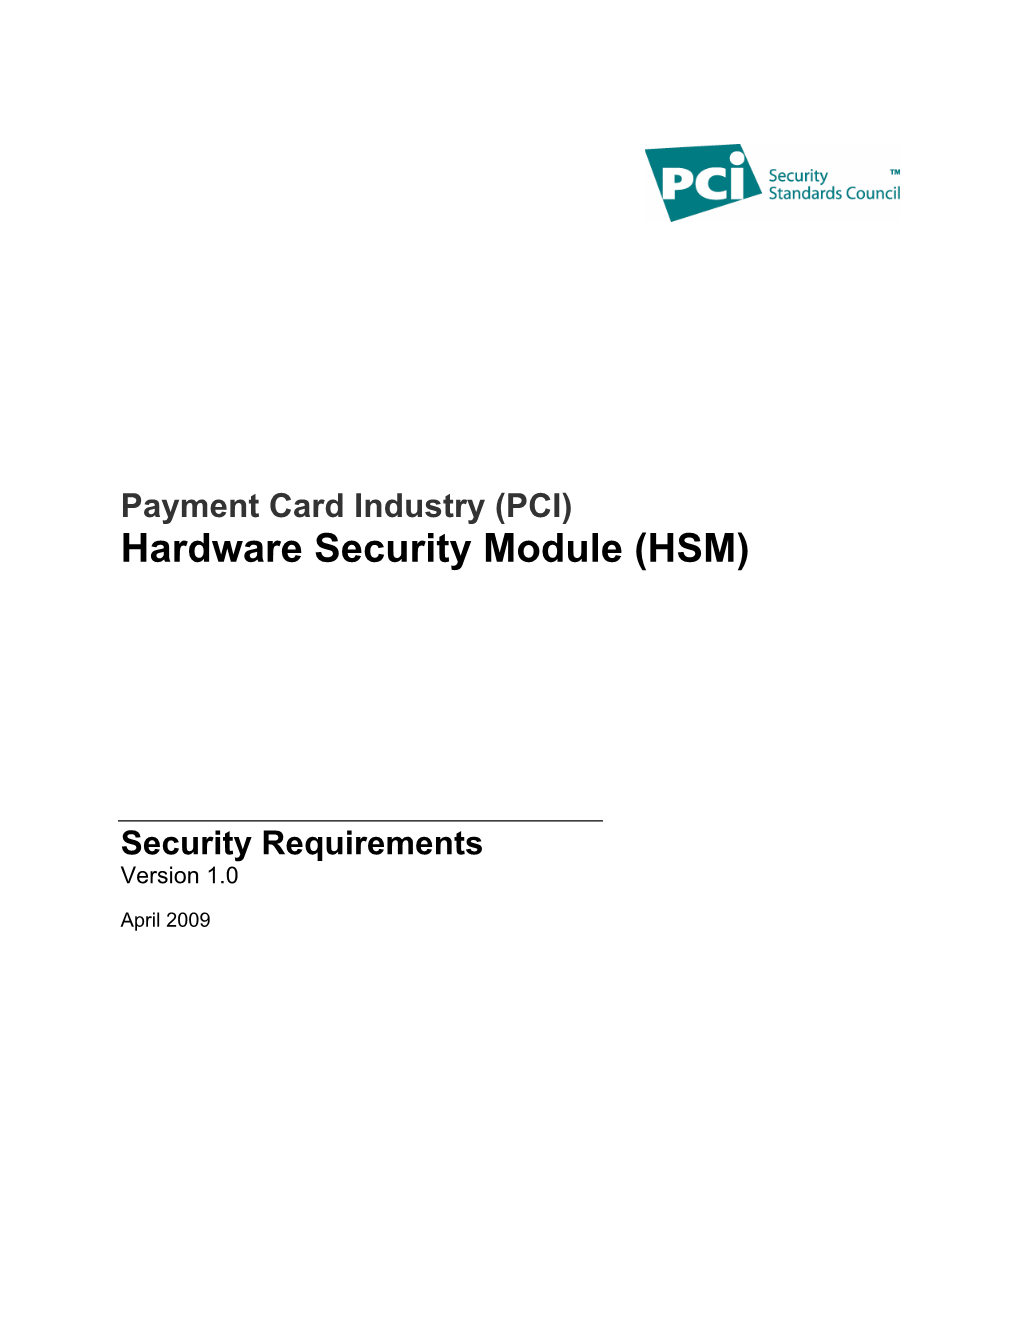 Payment Card Industry (PCI) Hardware Security Module (HSM)